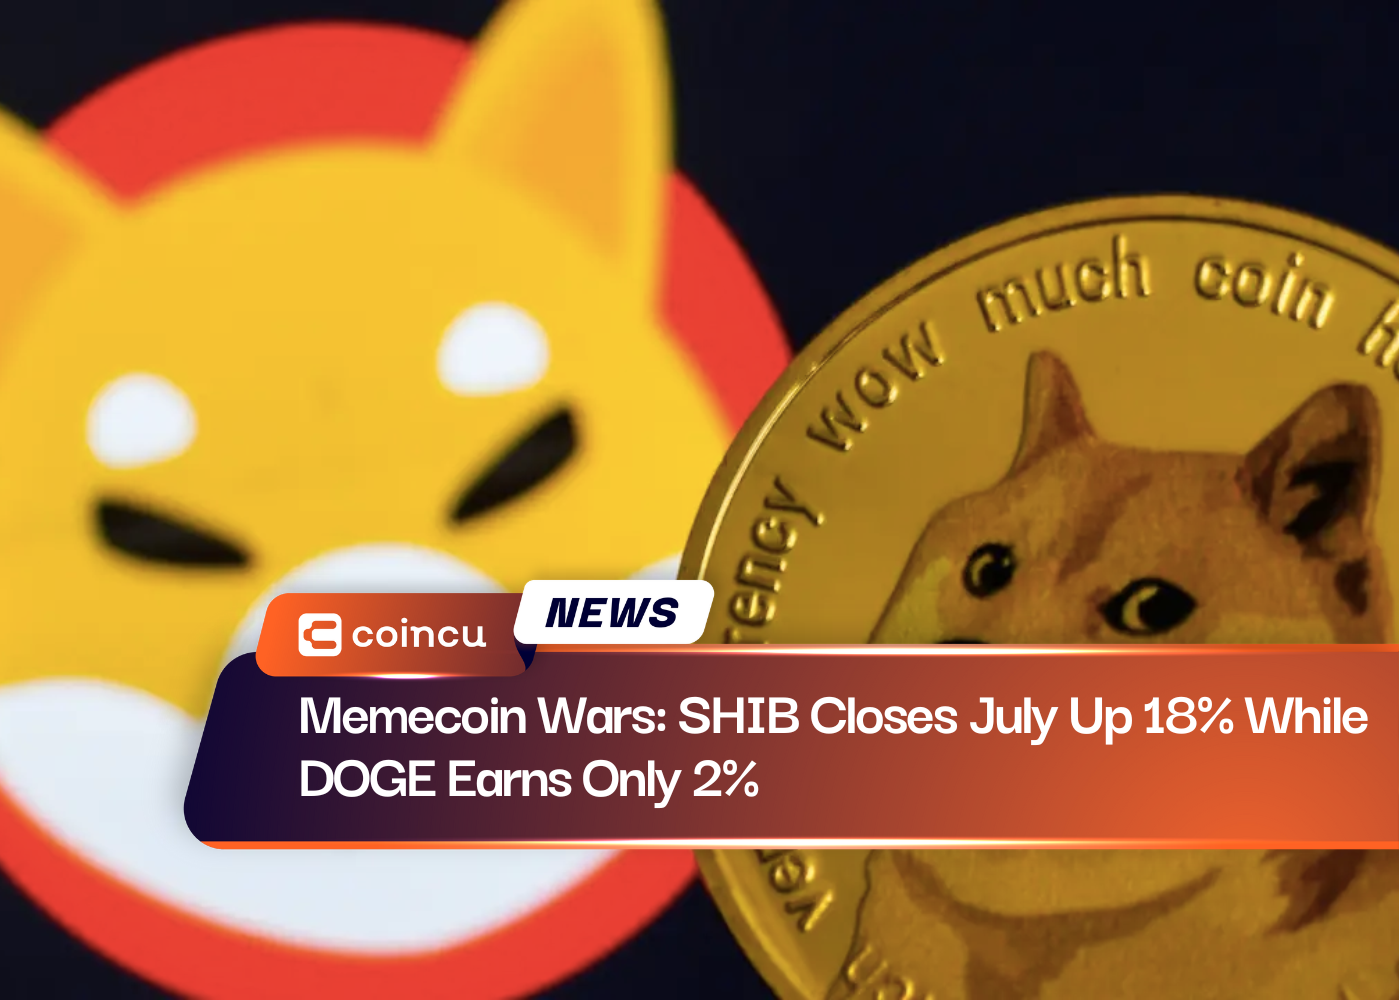 Memecoin Wars: Shiba Inu Closes July Up 18% While Dogecoin Earns Only 2%